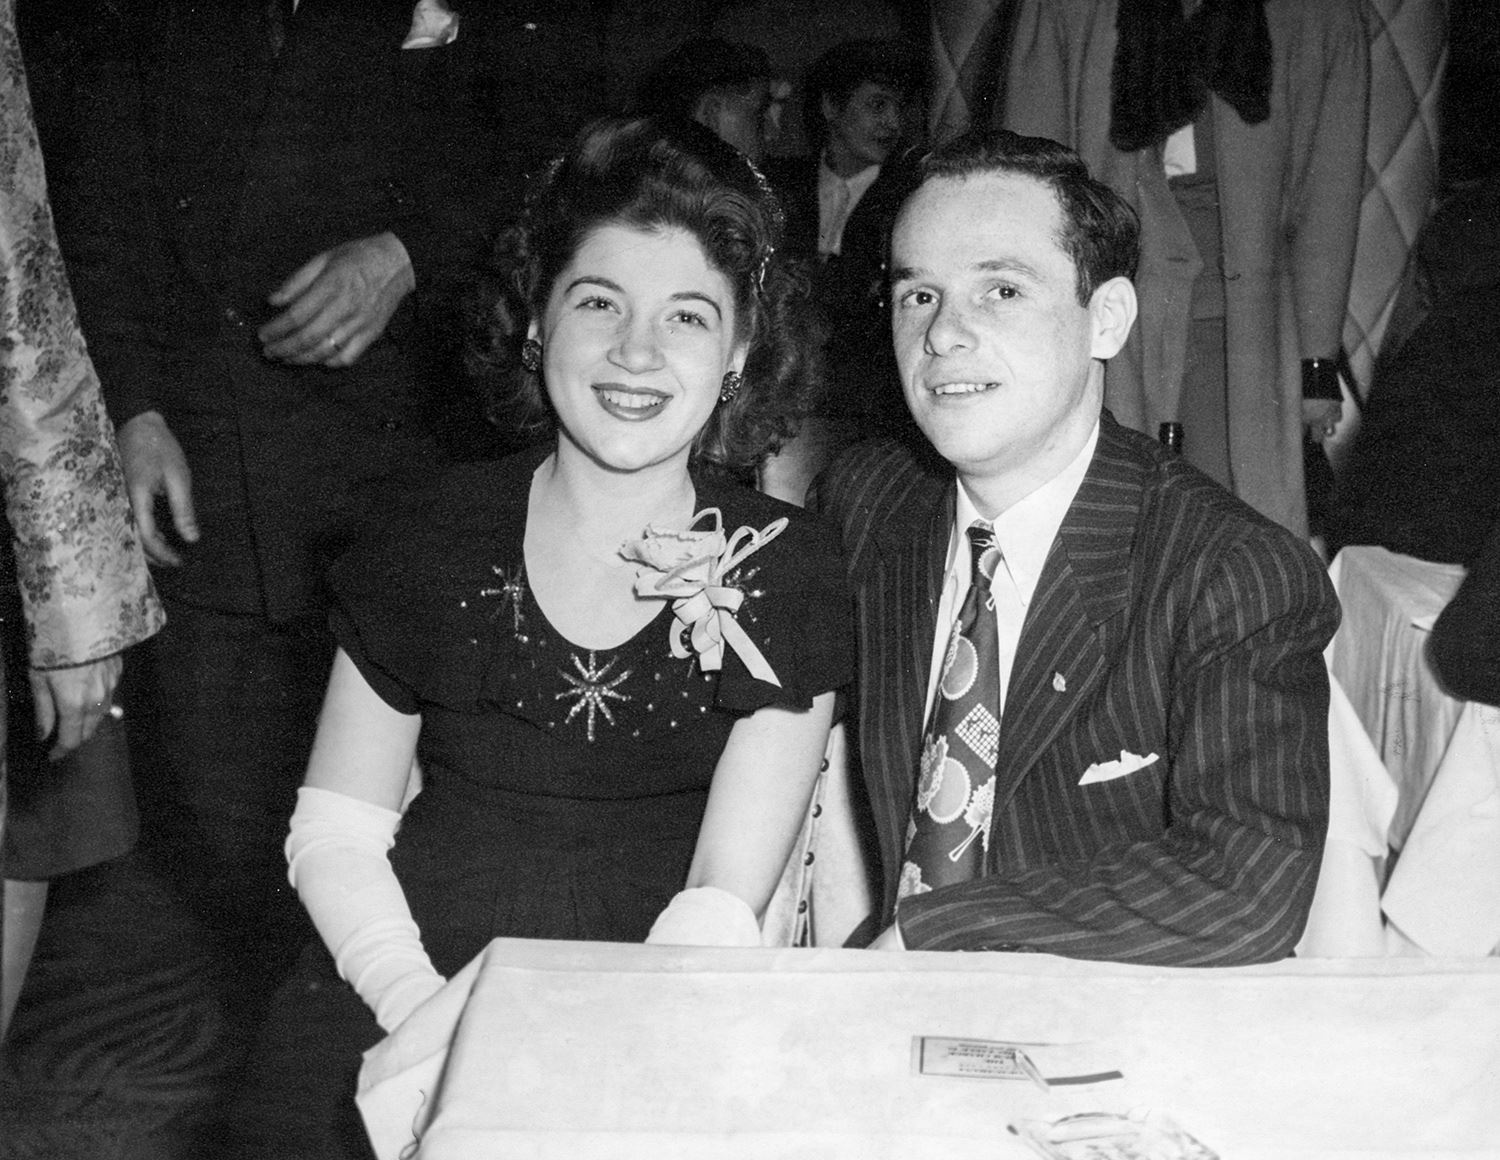 Black and white photograph of two young adults, a woman with dark hair wearing a dark dress, and a man wearing a suit and tie, smile sitting together at a table.